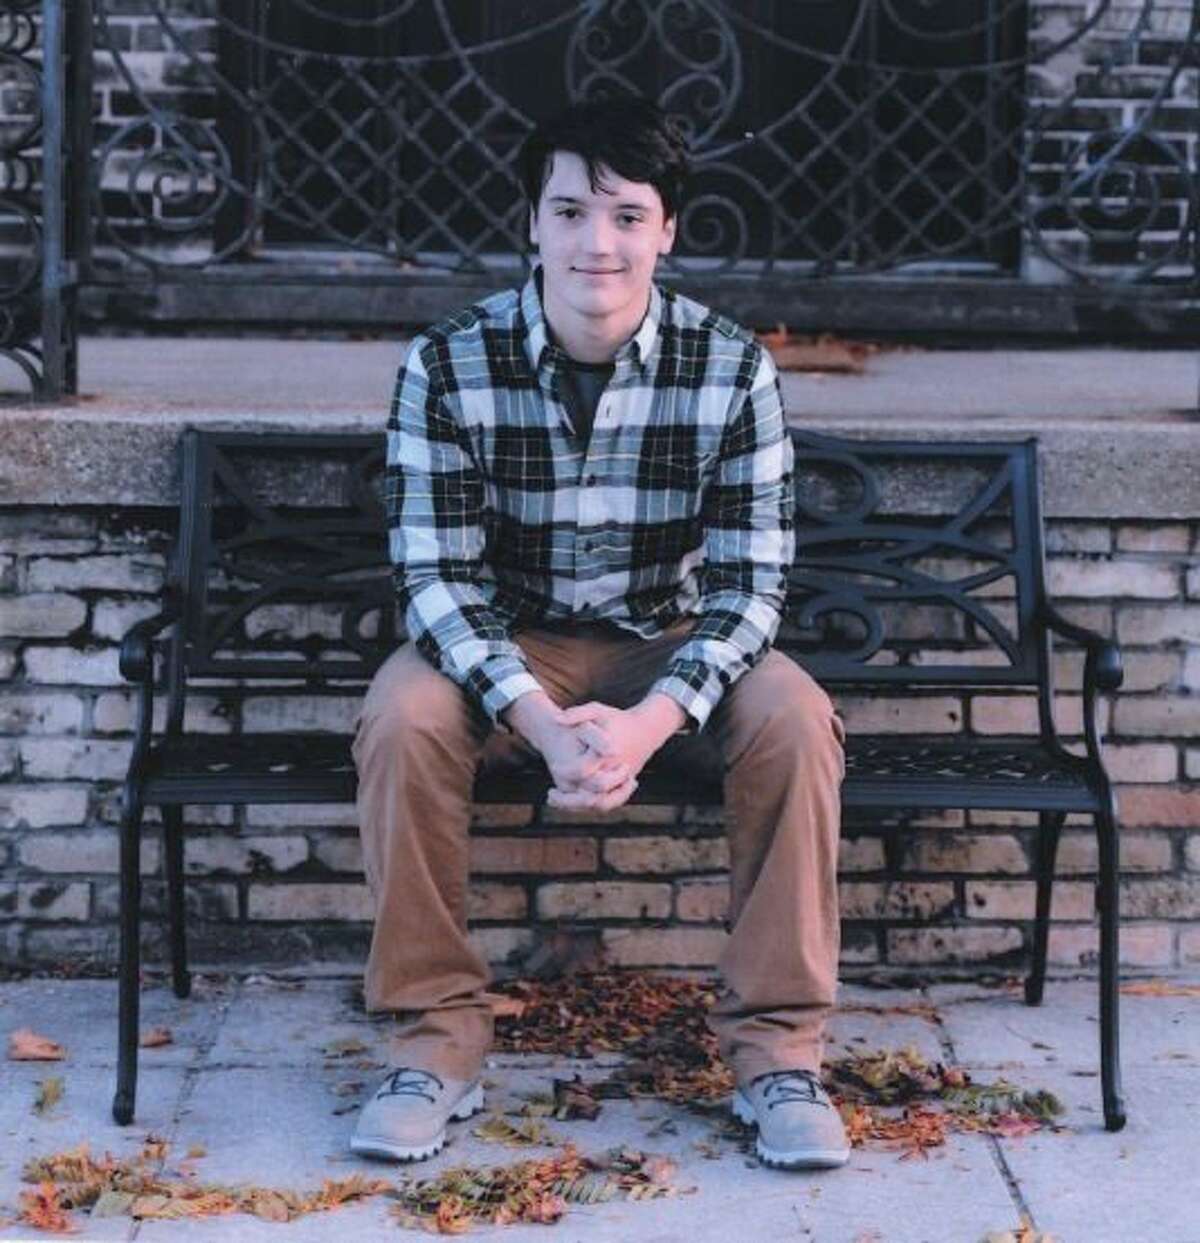 Keelan Eskridge, a graduate of Manistee High School, received one of the 33 scholarships totaling more than $100,000 awarded by the Manistee County Community Foundation for the upcoming 2021-2022 academic year. The Minger Family Endowment Fund scholarship is renewable up to three times, providing critical support to help students persist in college and achieve their postsecondary education goals. (Courtesy photo)